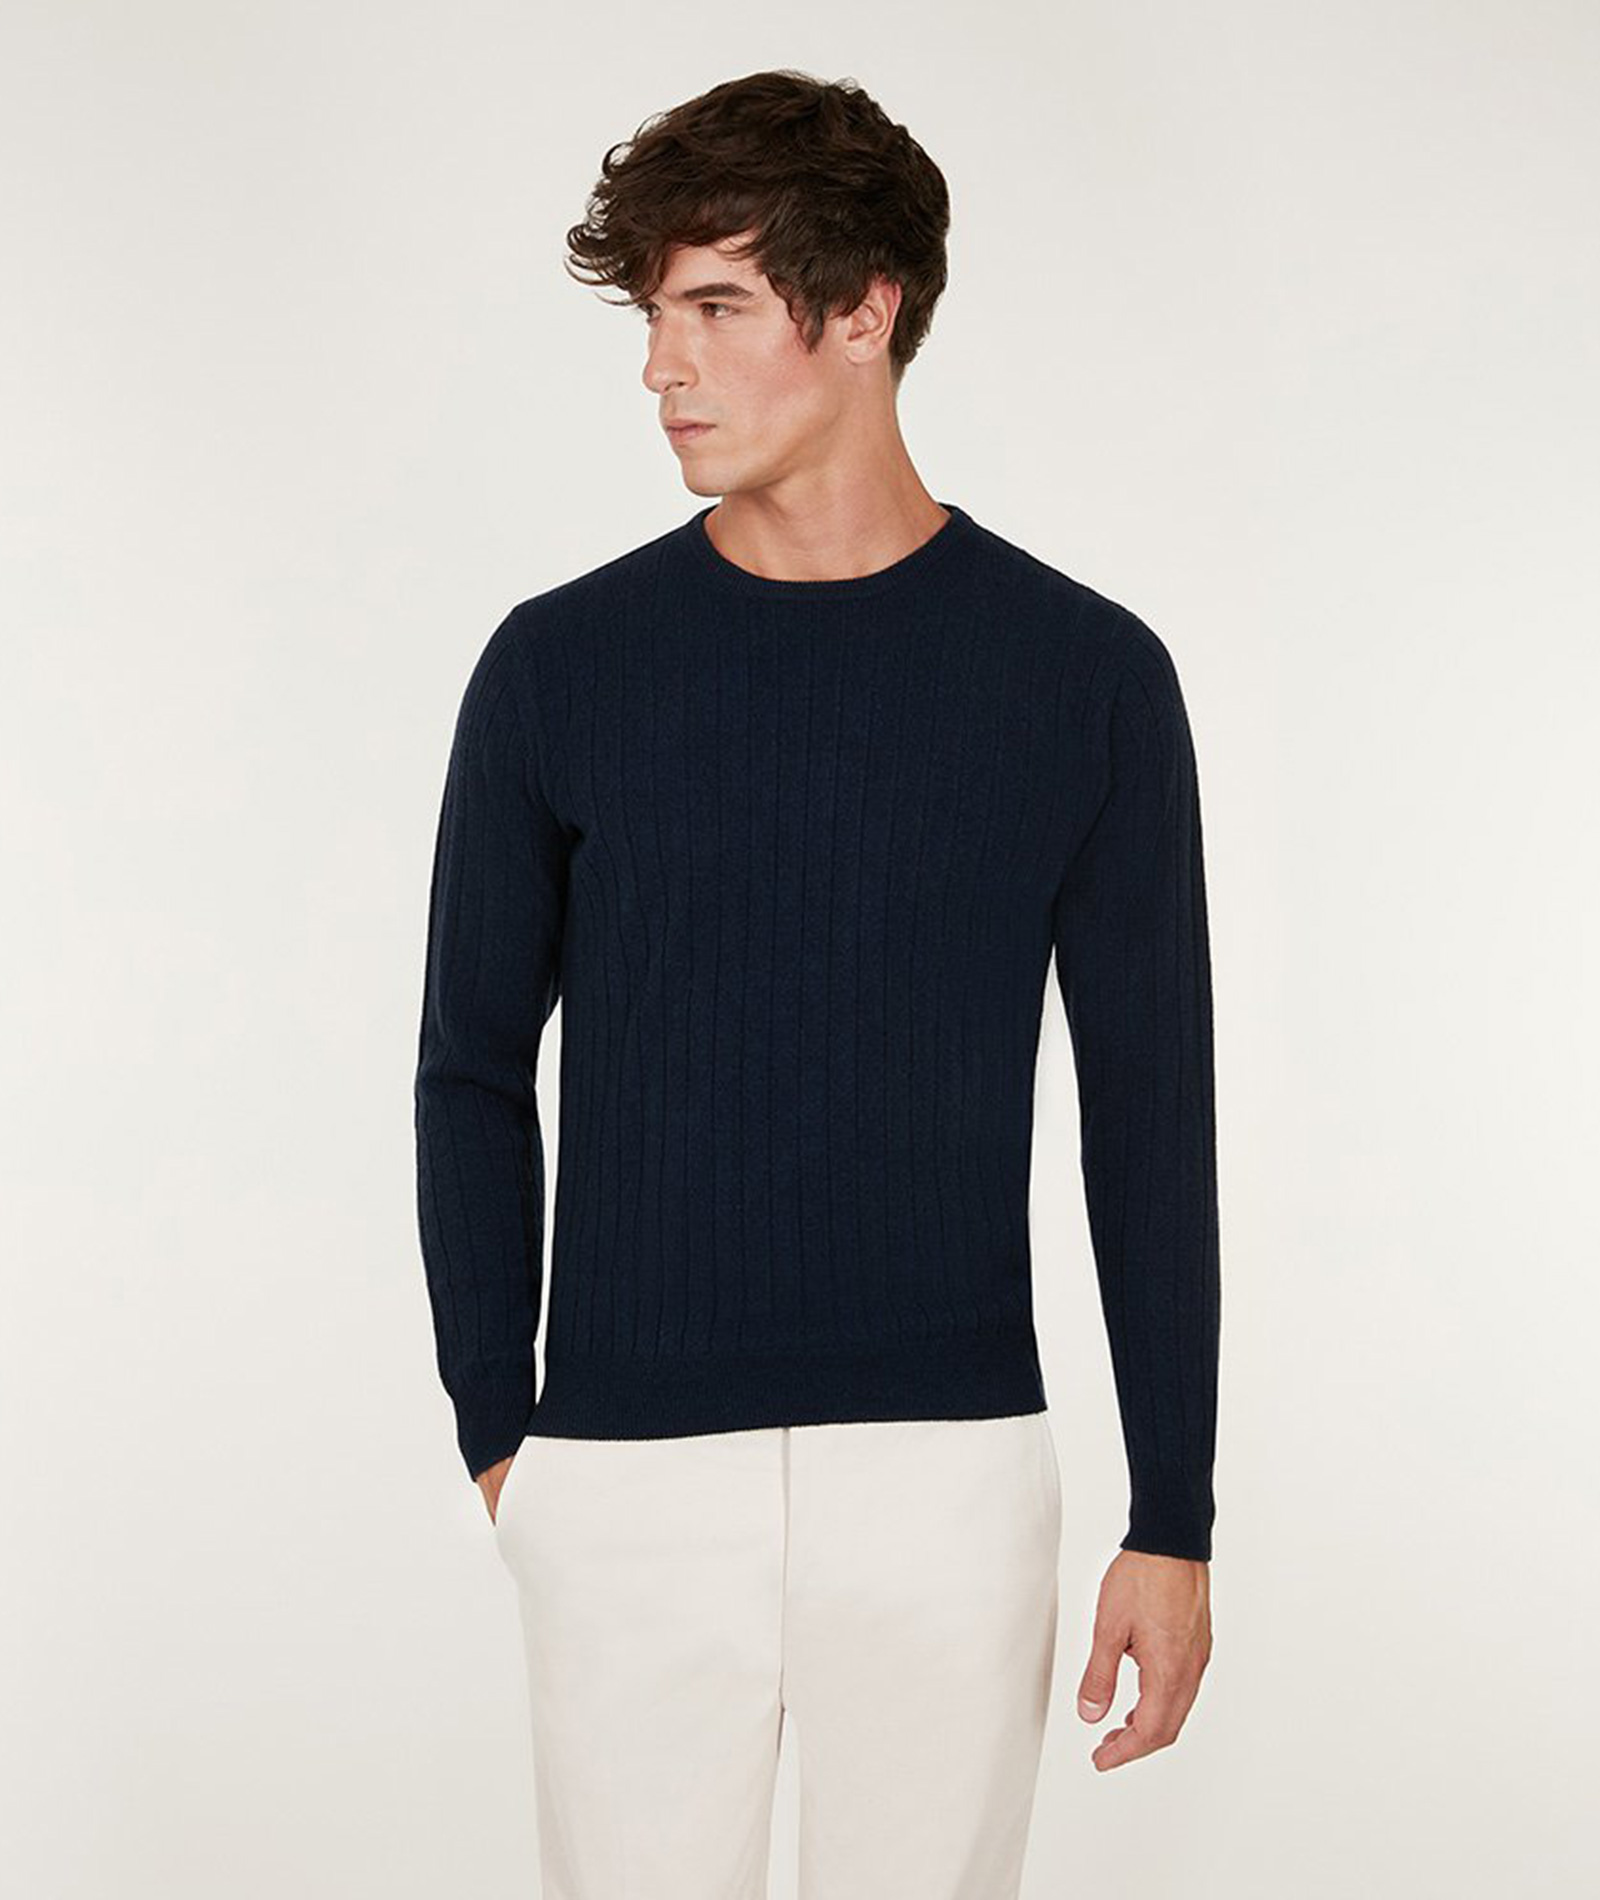 Blue Cashmere Men's Sweater, Everyday Elegance Made in Italy | Lanieri